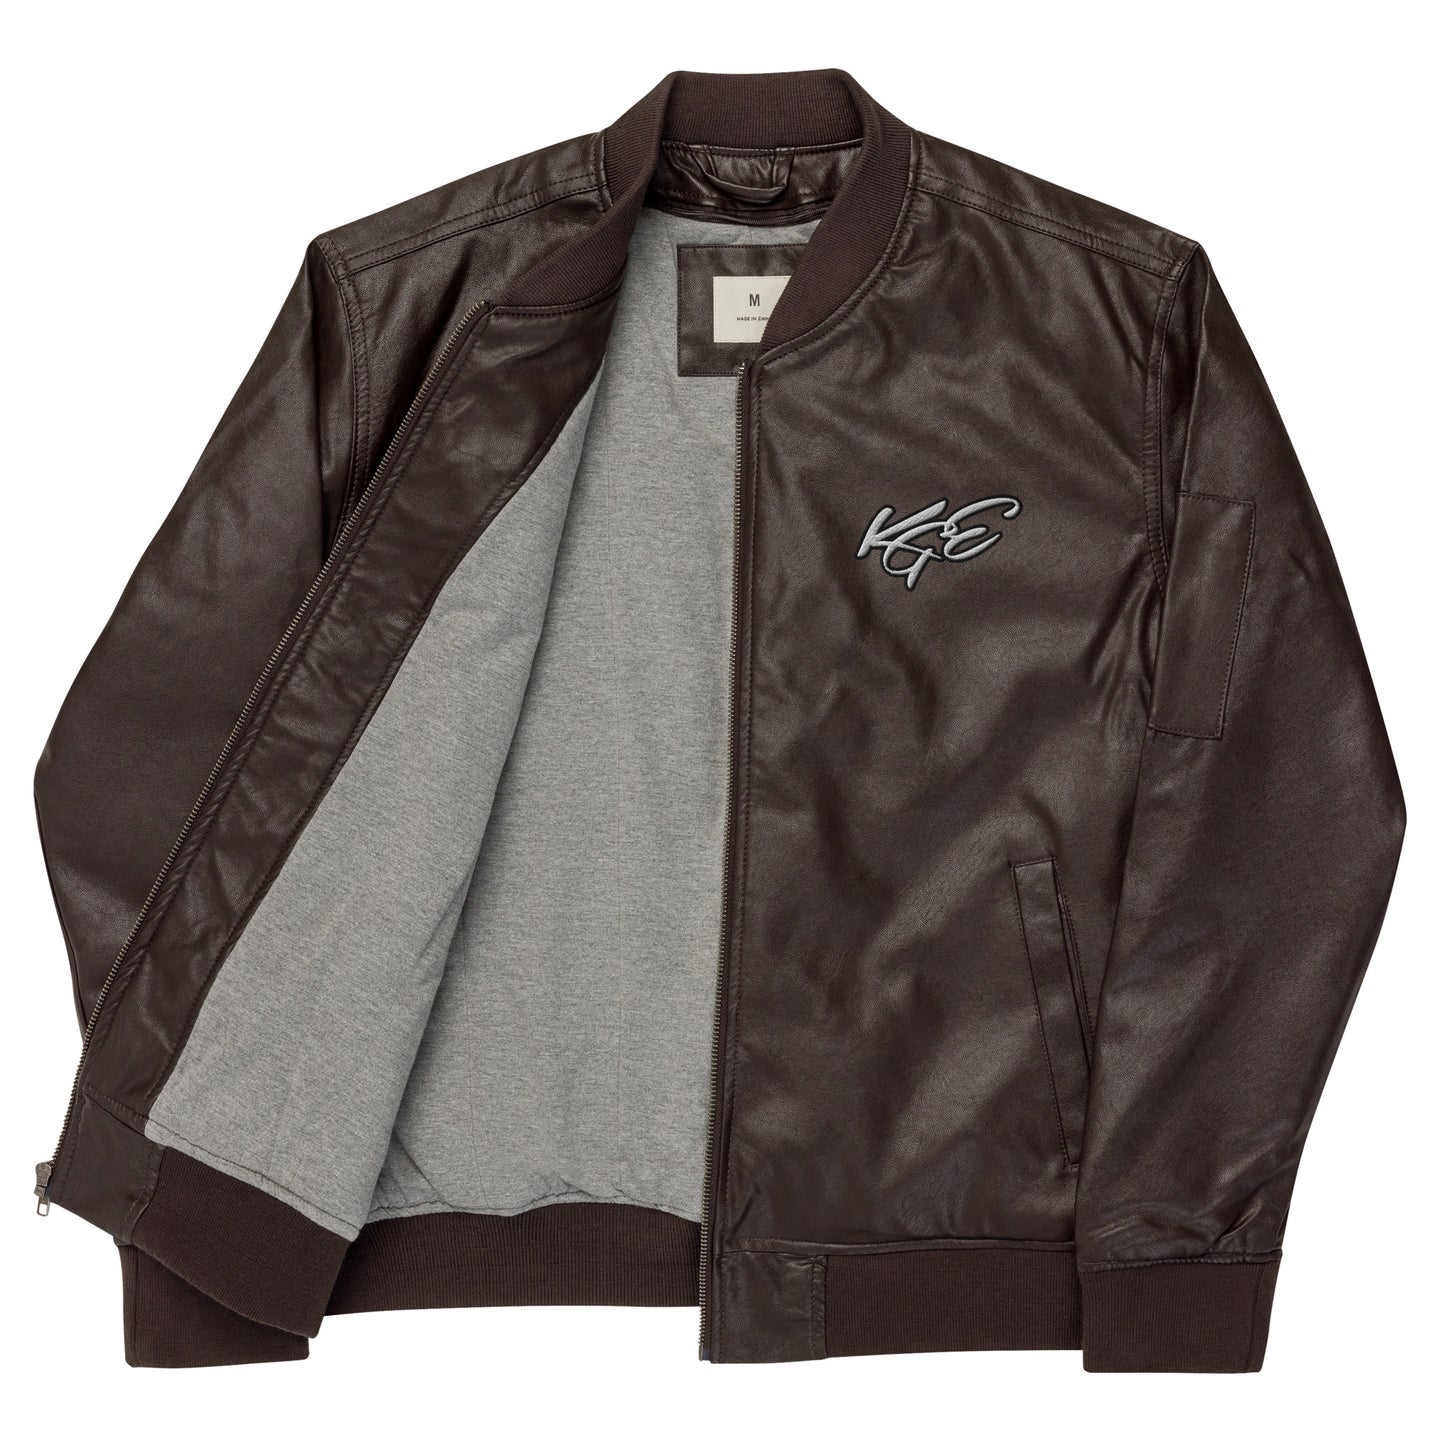 KGE Unlid Embroidery PU Leather Bomber Jacket